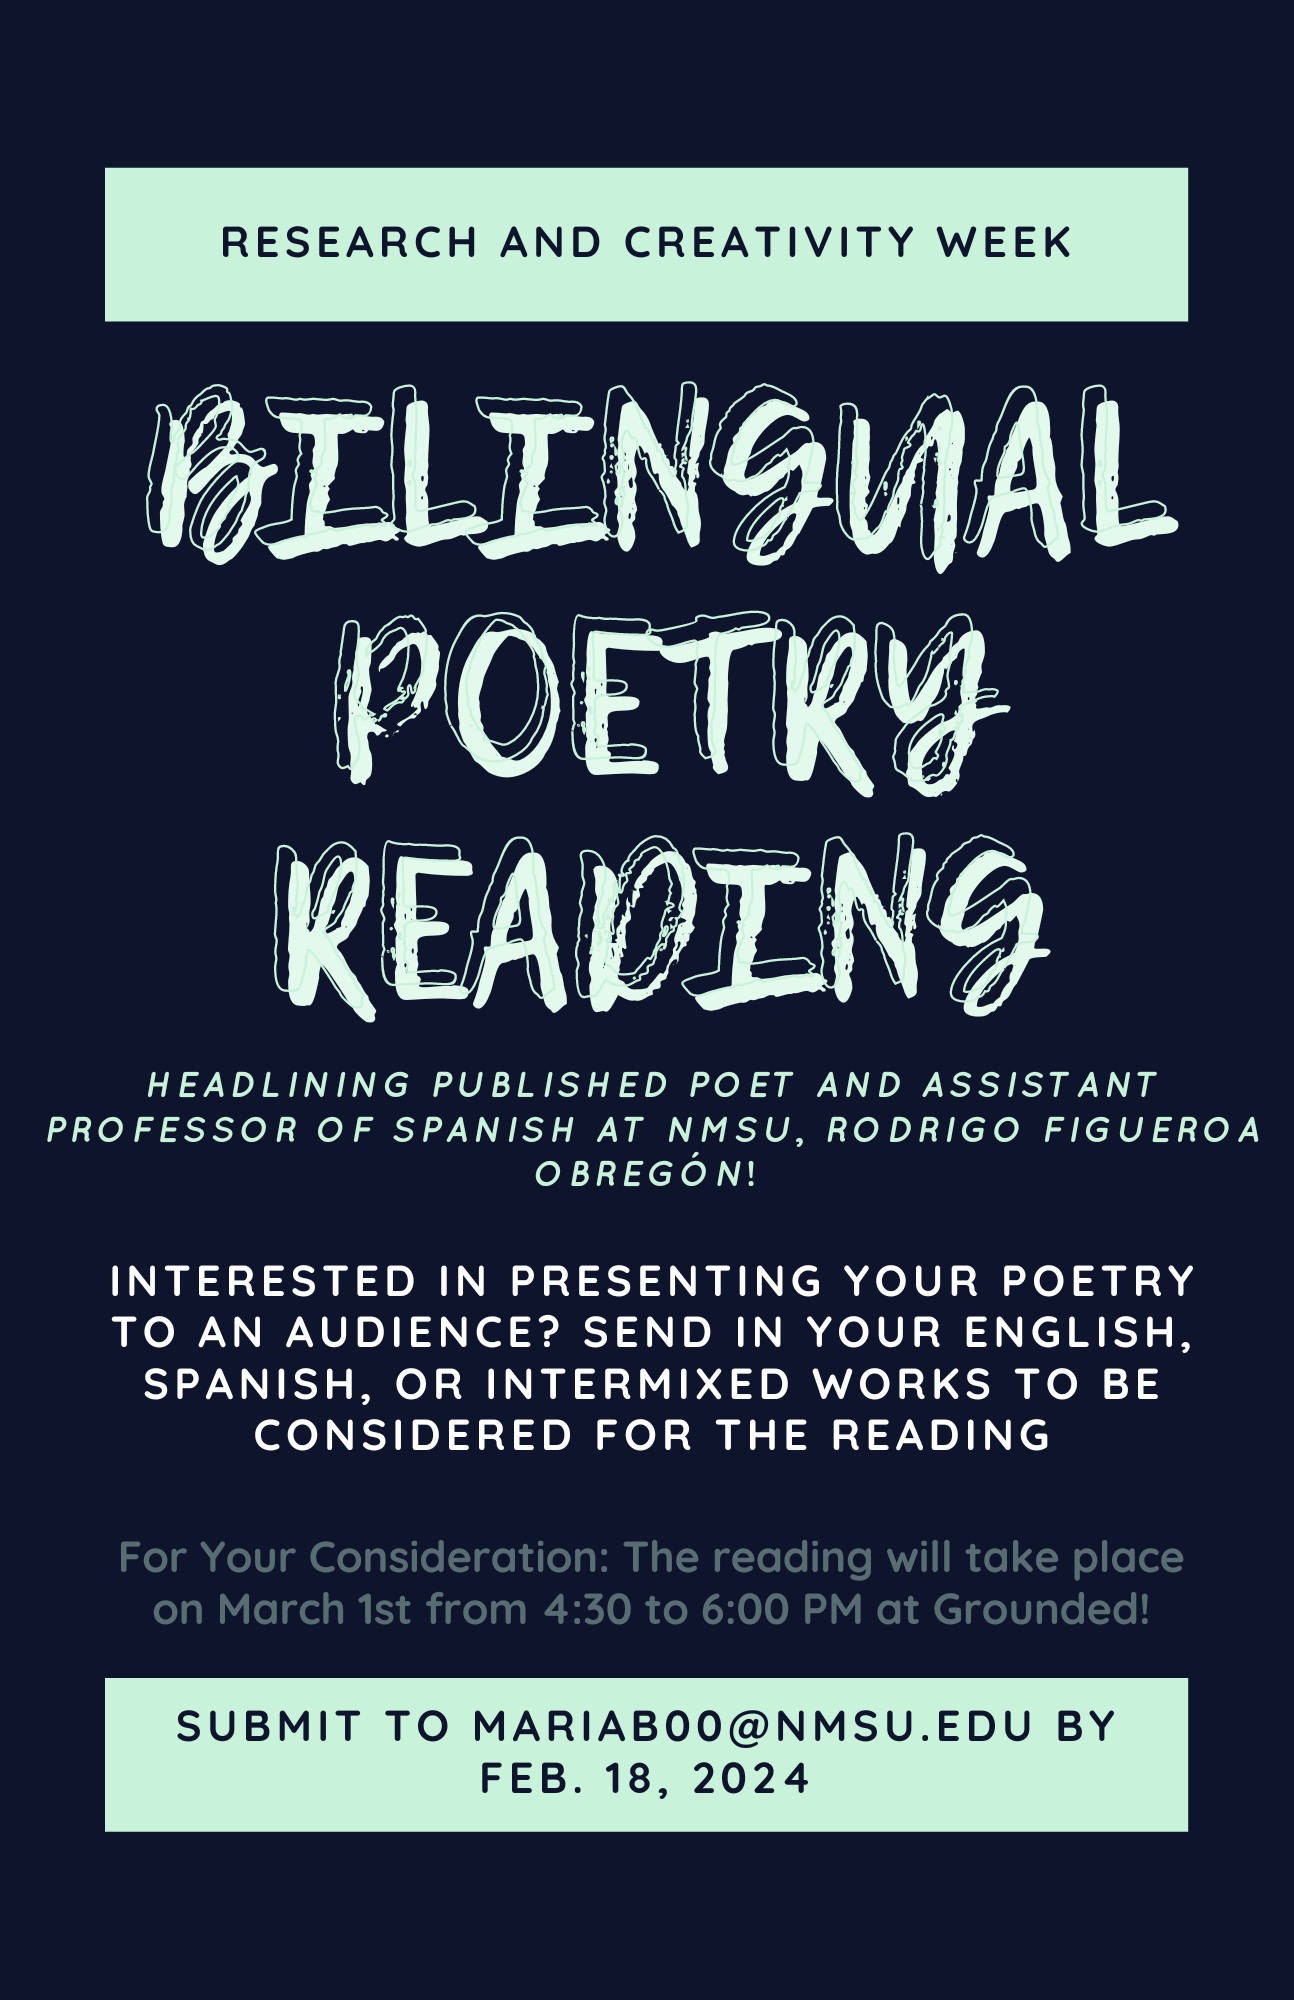 Bilingual-Poetry-Reading-Submissions-Call-RCW-2024.jpg